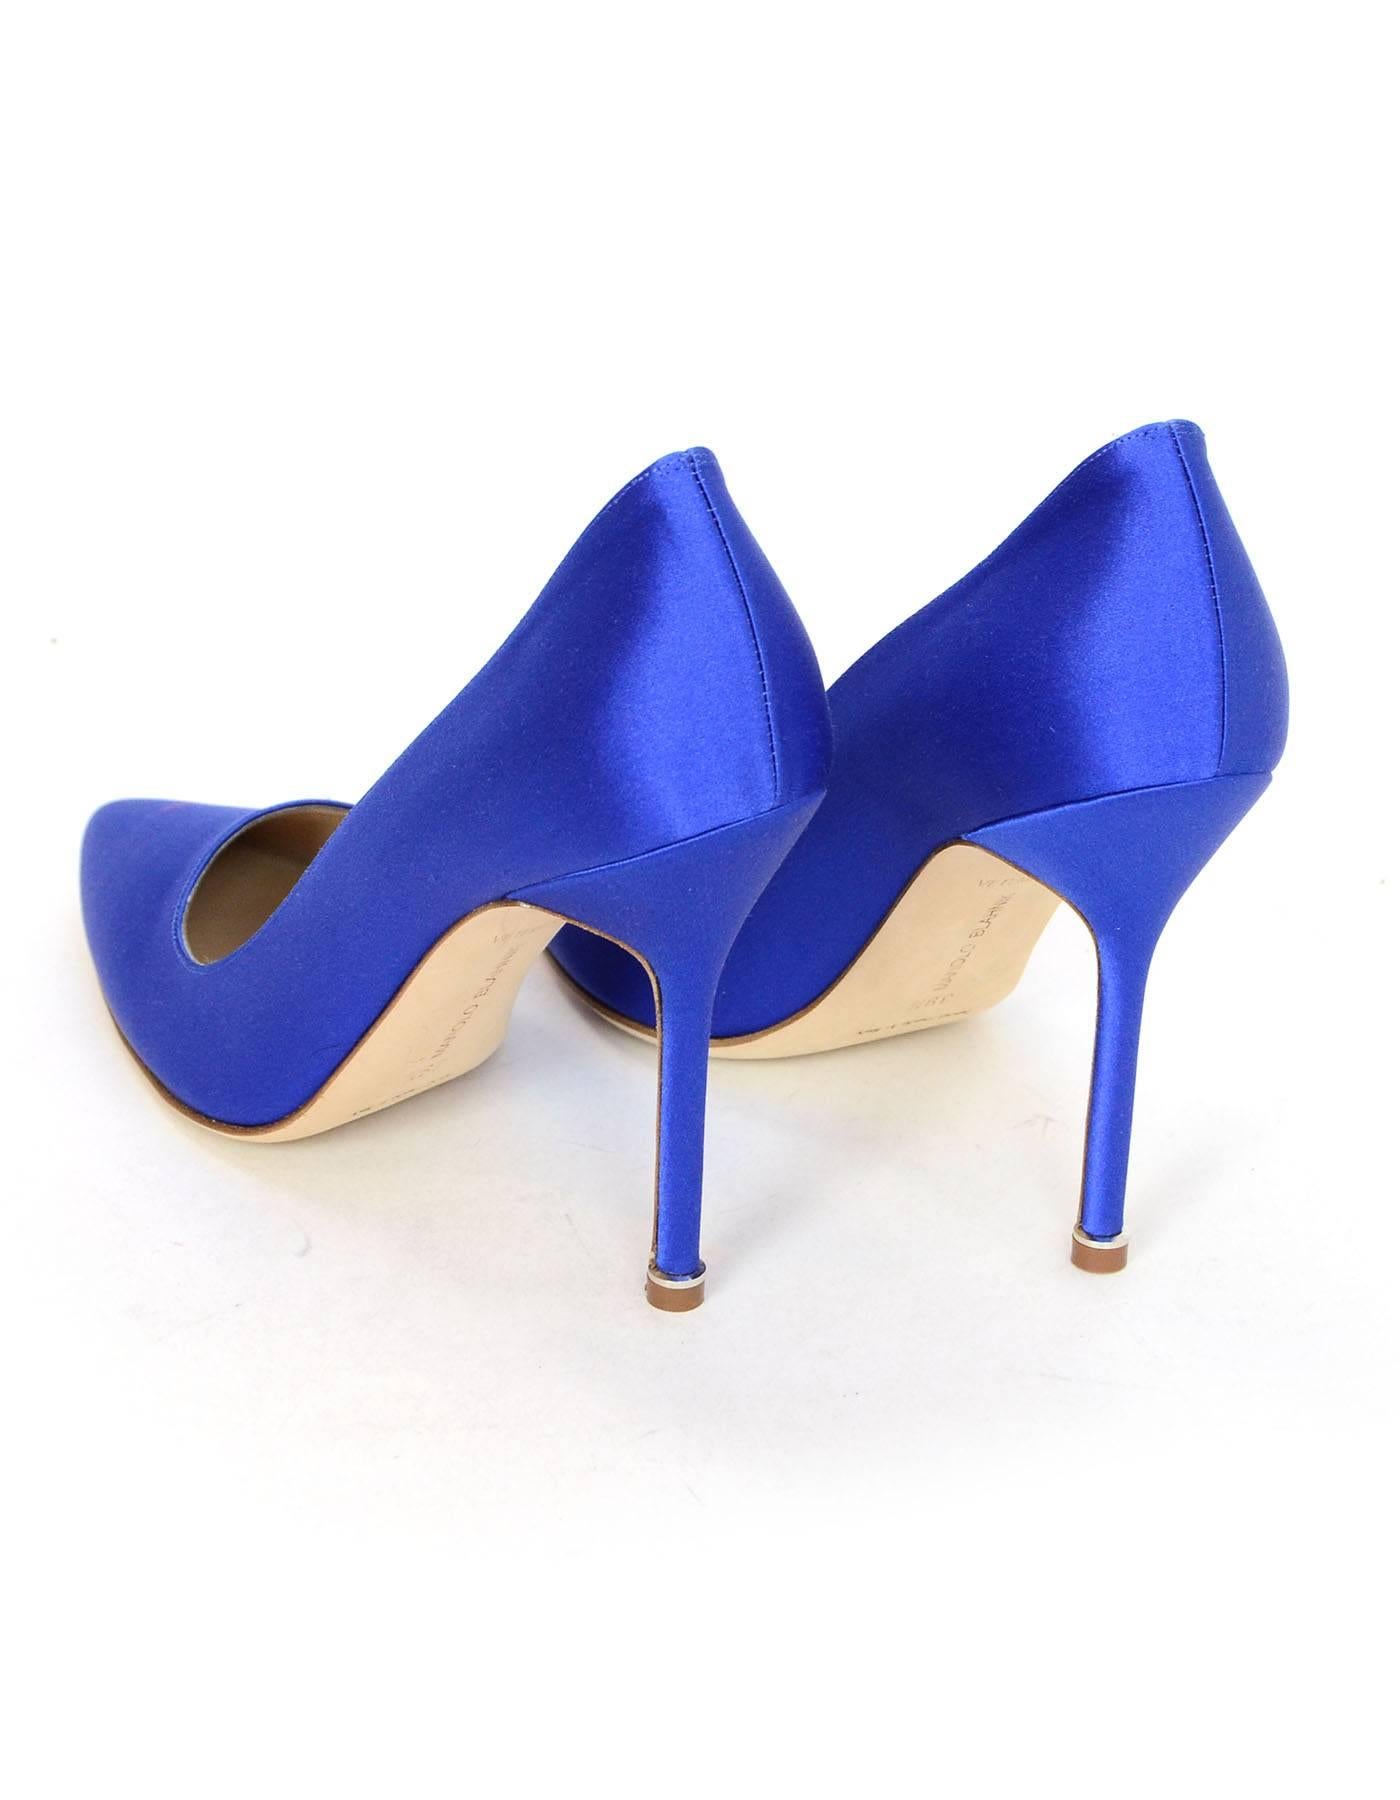 Vetements x Manolo Blahnik Blue Satin Signature Pumps Sz 39.5 NEW In Excellent Condition In New York, NY